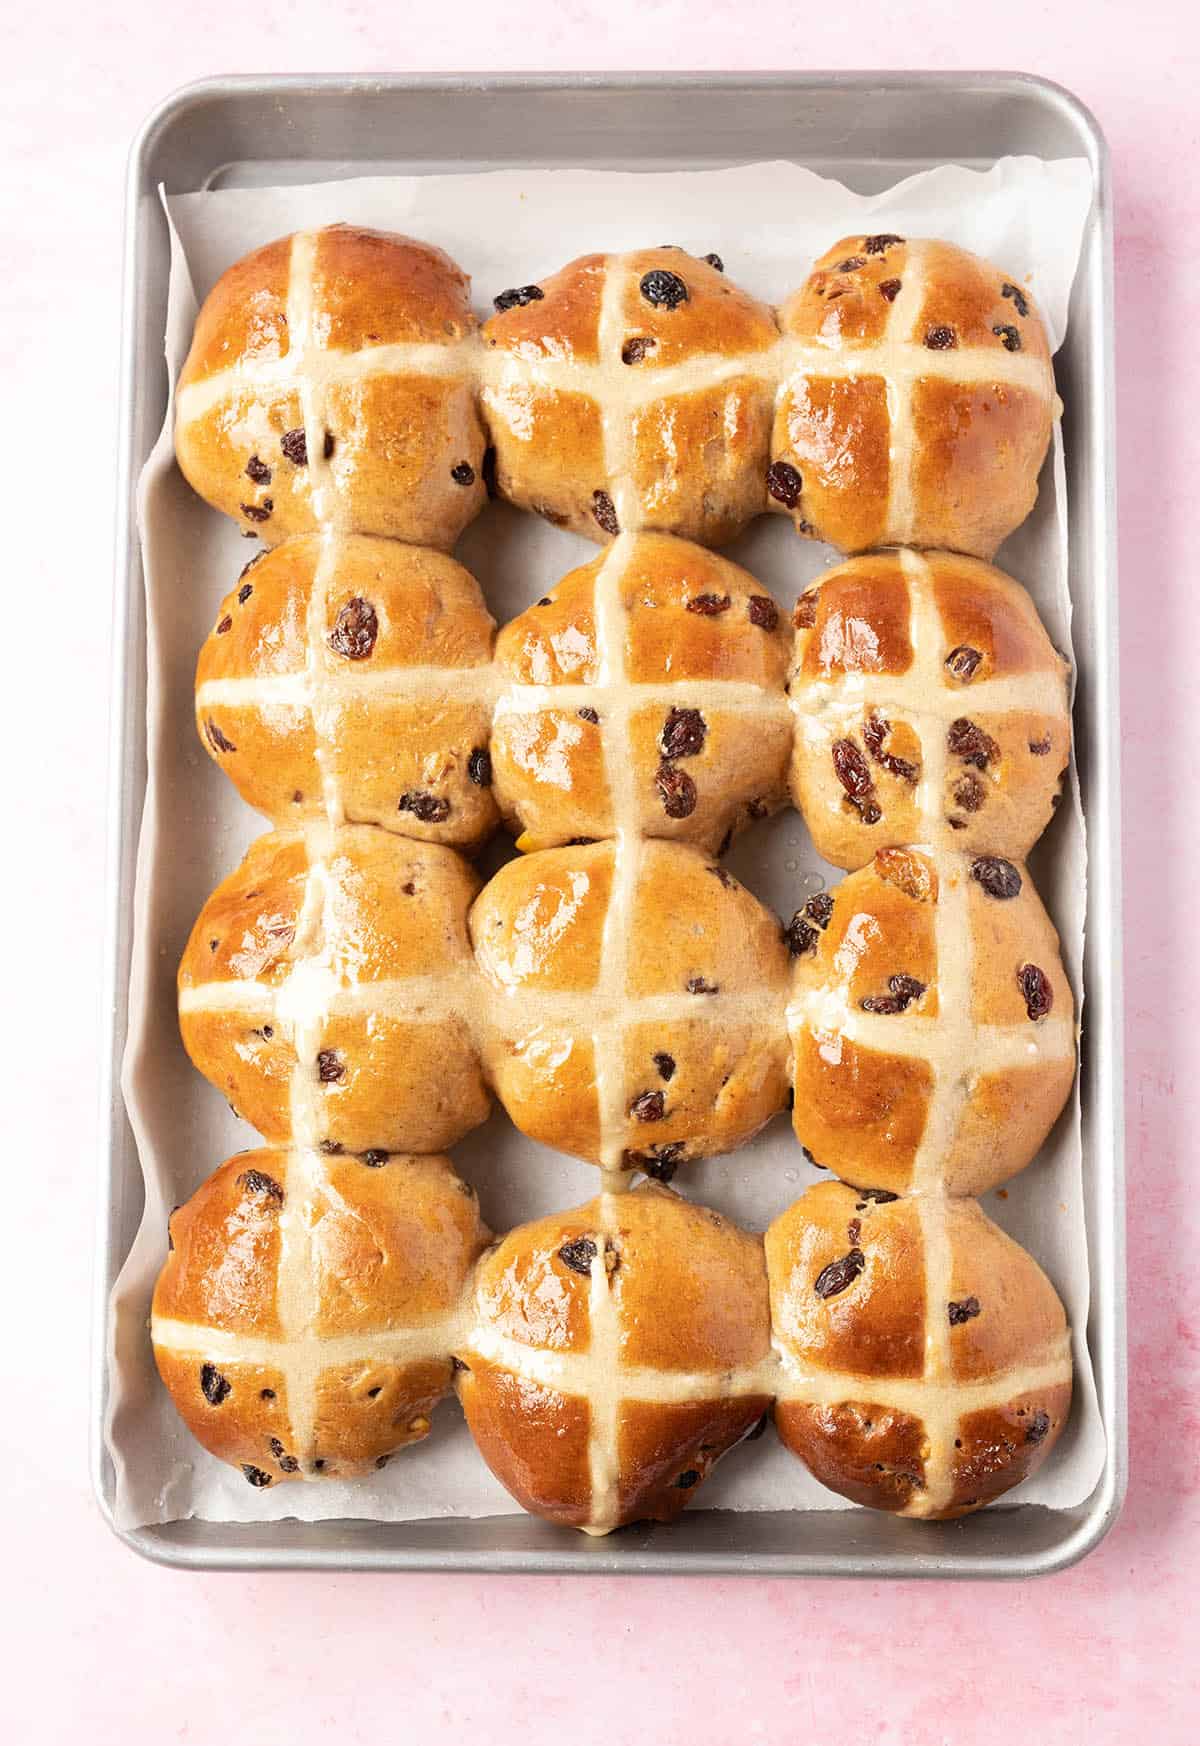 Top view of 12 hot cross buns fresh from the oven.